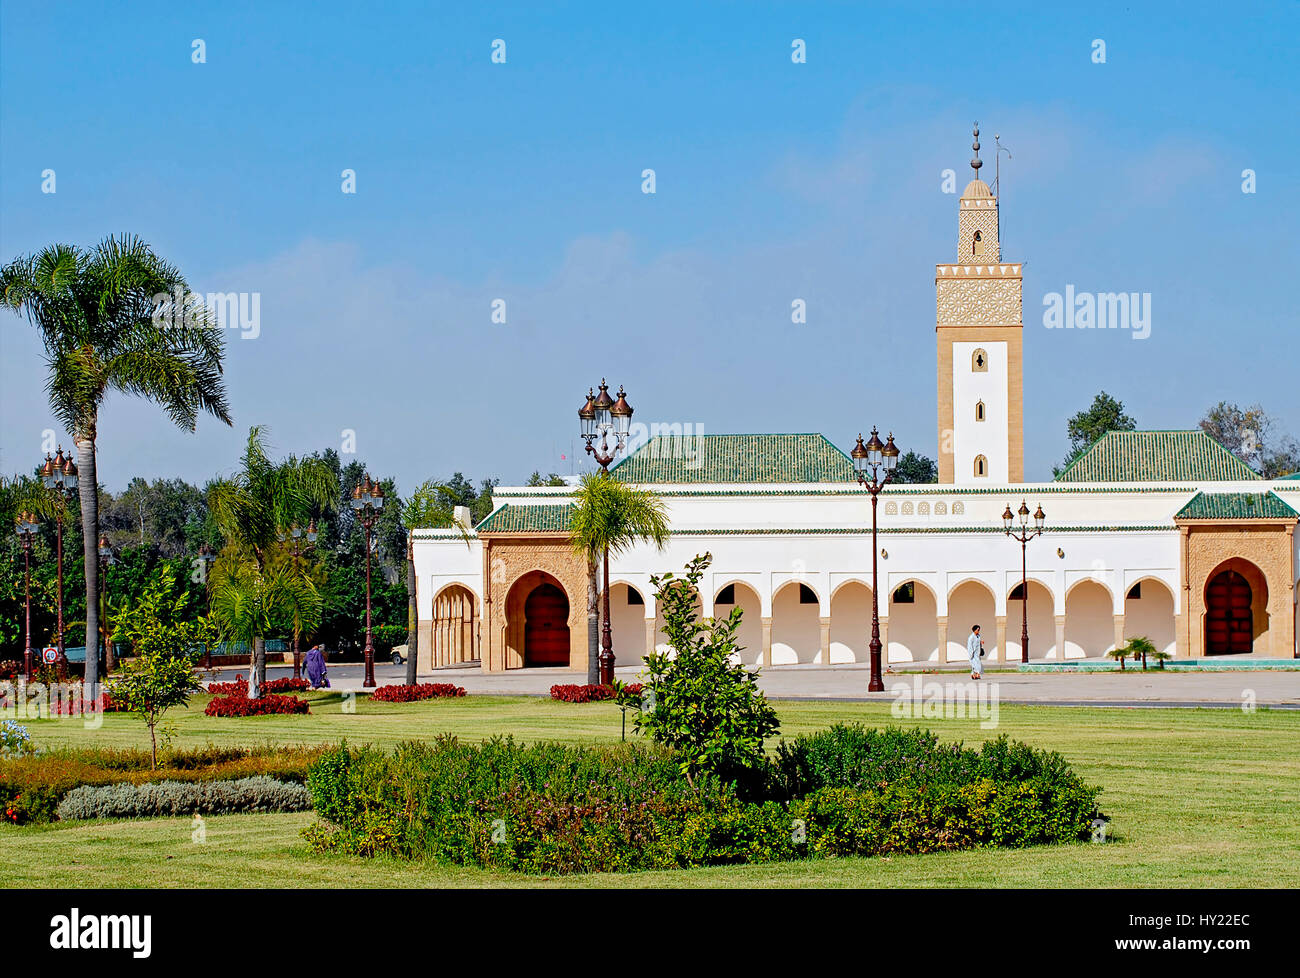 Image of the Mosque at the Kings Palace in Rabat, Morocco. Stock Photo